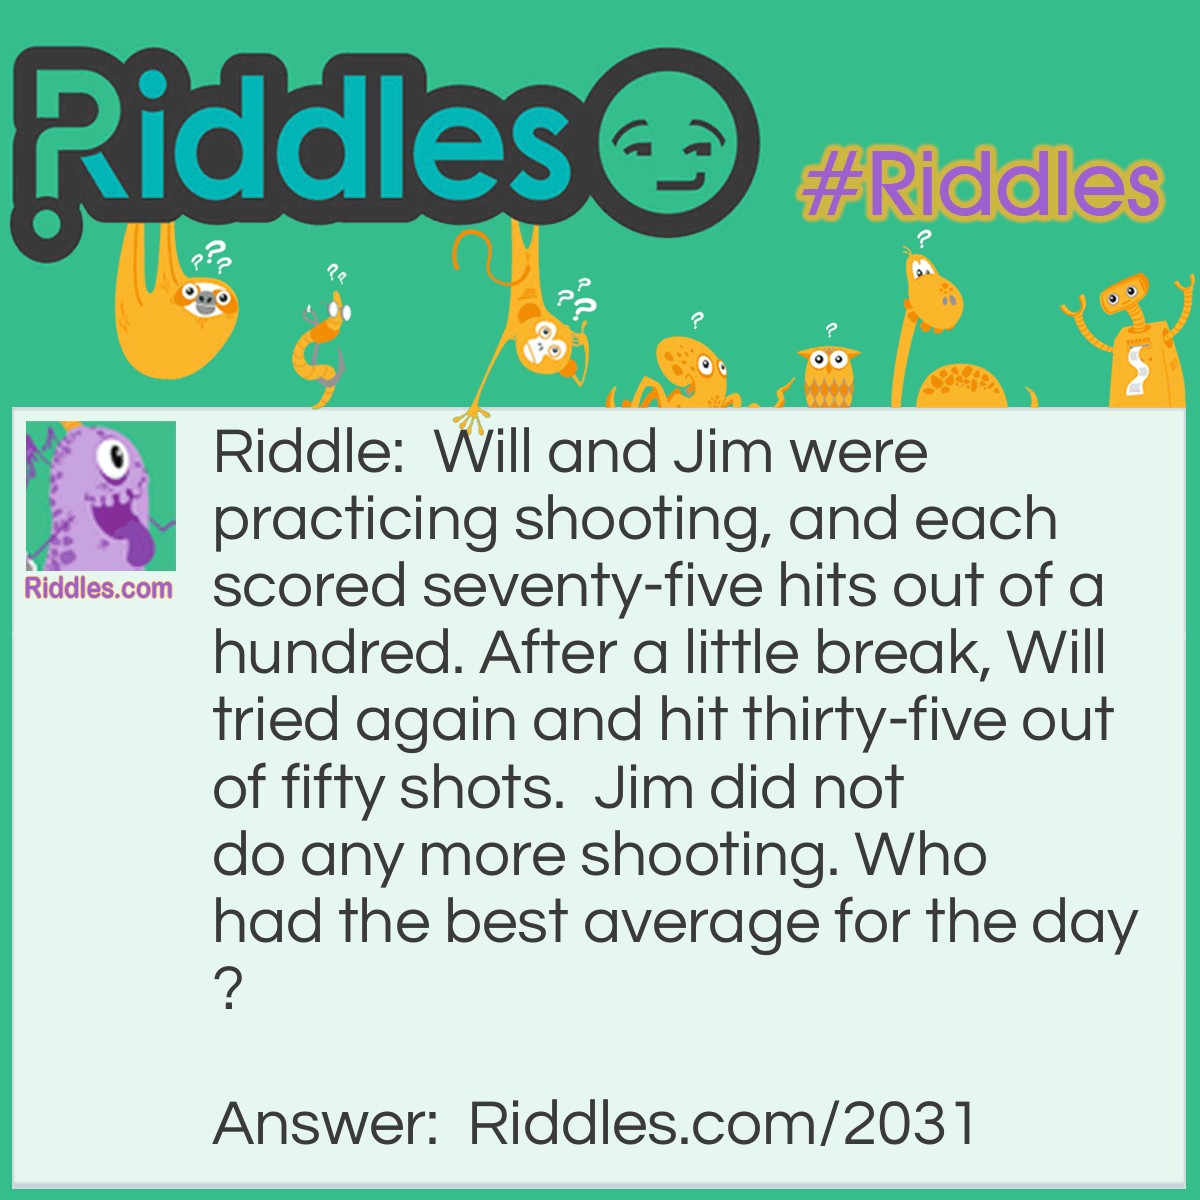 Riddle: Will and Jim were practicing shooting, and each scored seventy-five hits out of a hundred. After a little break, Will tried again and hit thirty-five out of fifty shots.  Jim did not do any more shooting. 
Who had the best average for the day? Answer: Jim's average is higher.